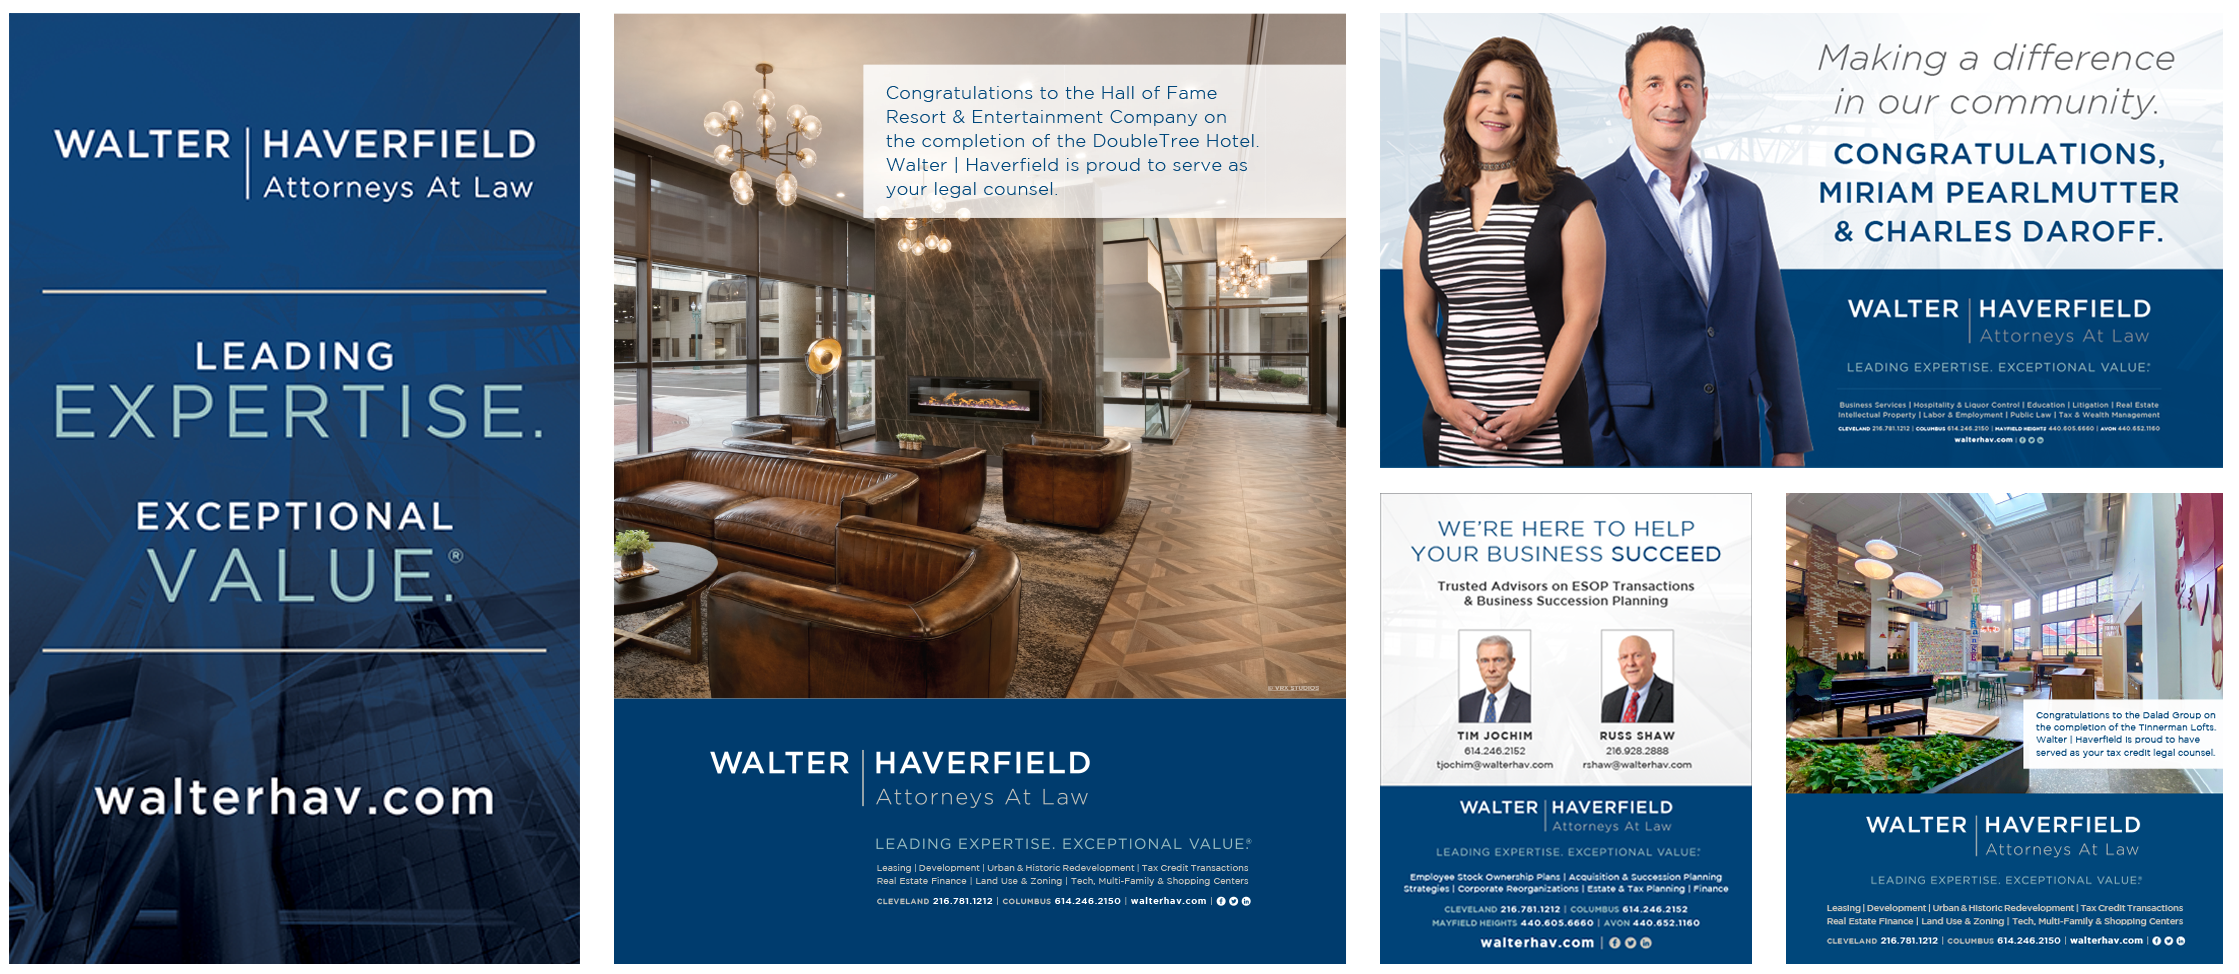 Walter | Haverfield Ads and Social Media